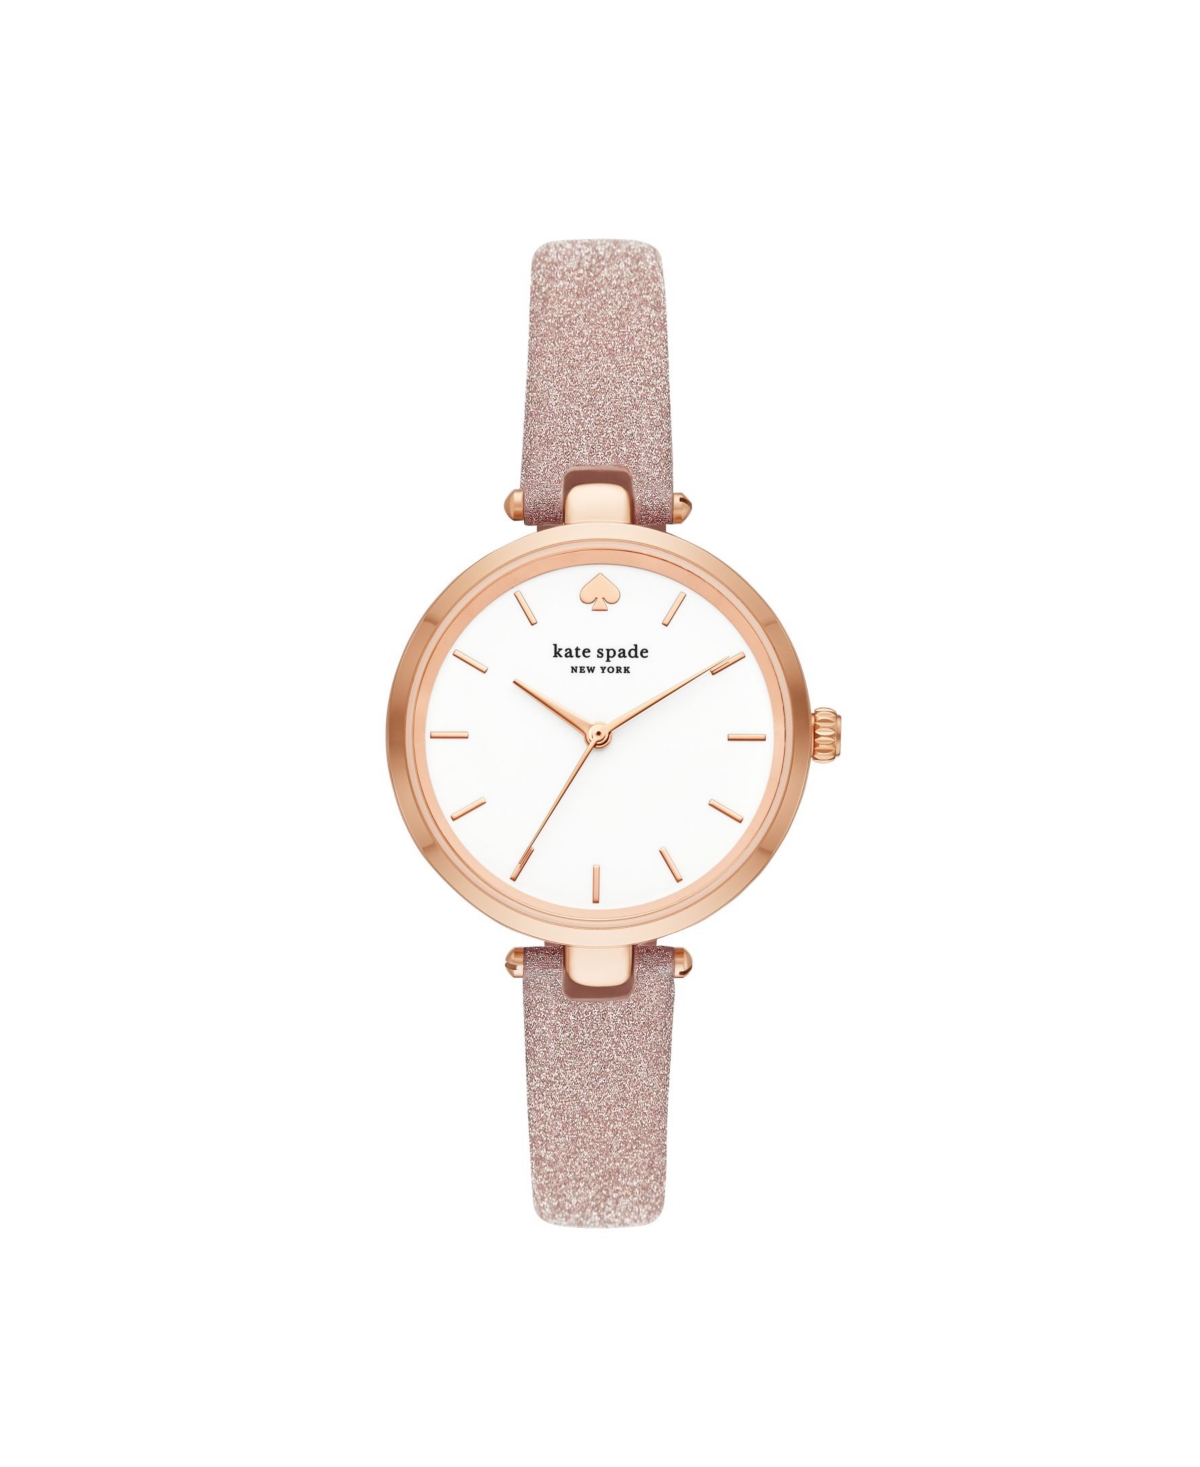 kate spade new york Women's Holland Three-Hand Rose Gold-Tone Glitter  Leather Watch 34mm & Reviews - All Watches - Jewelry & Watches - Macy's